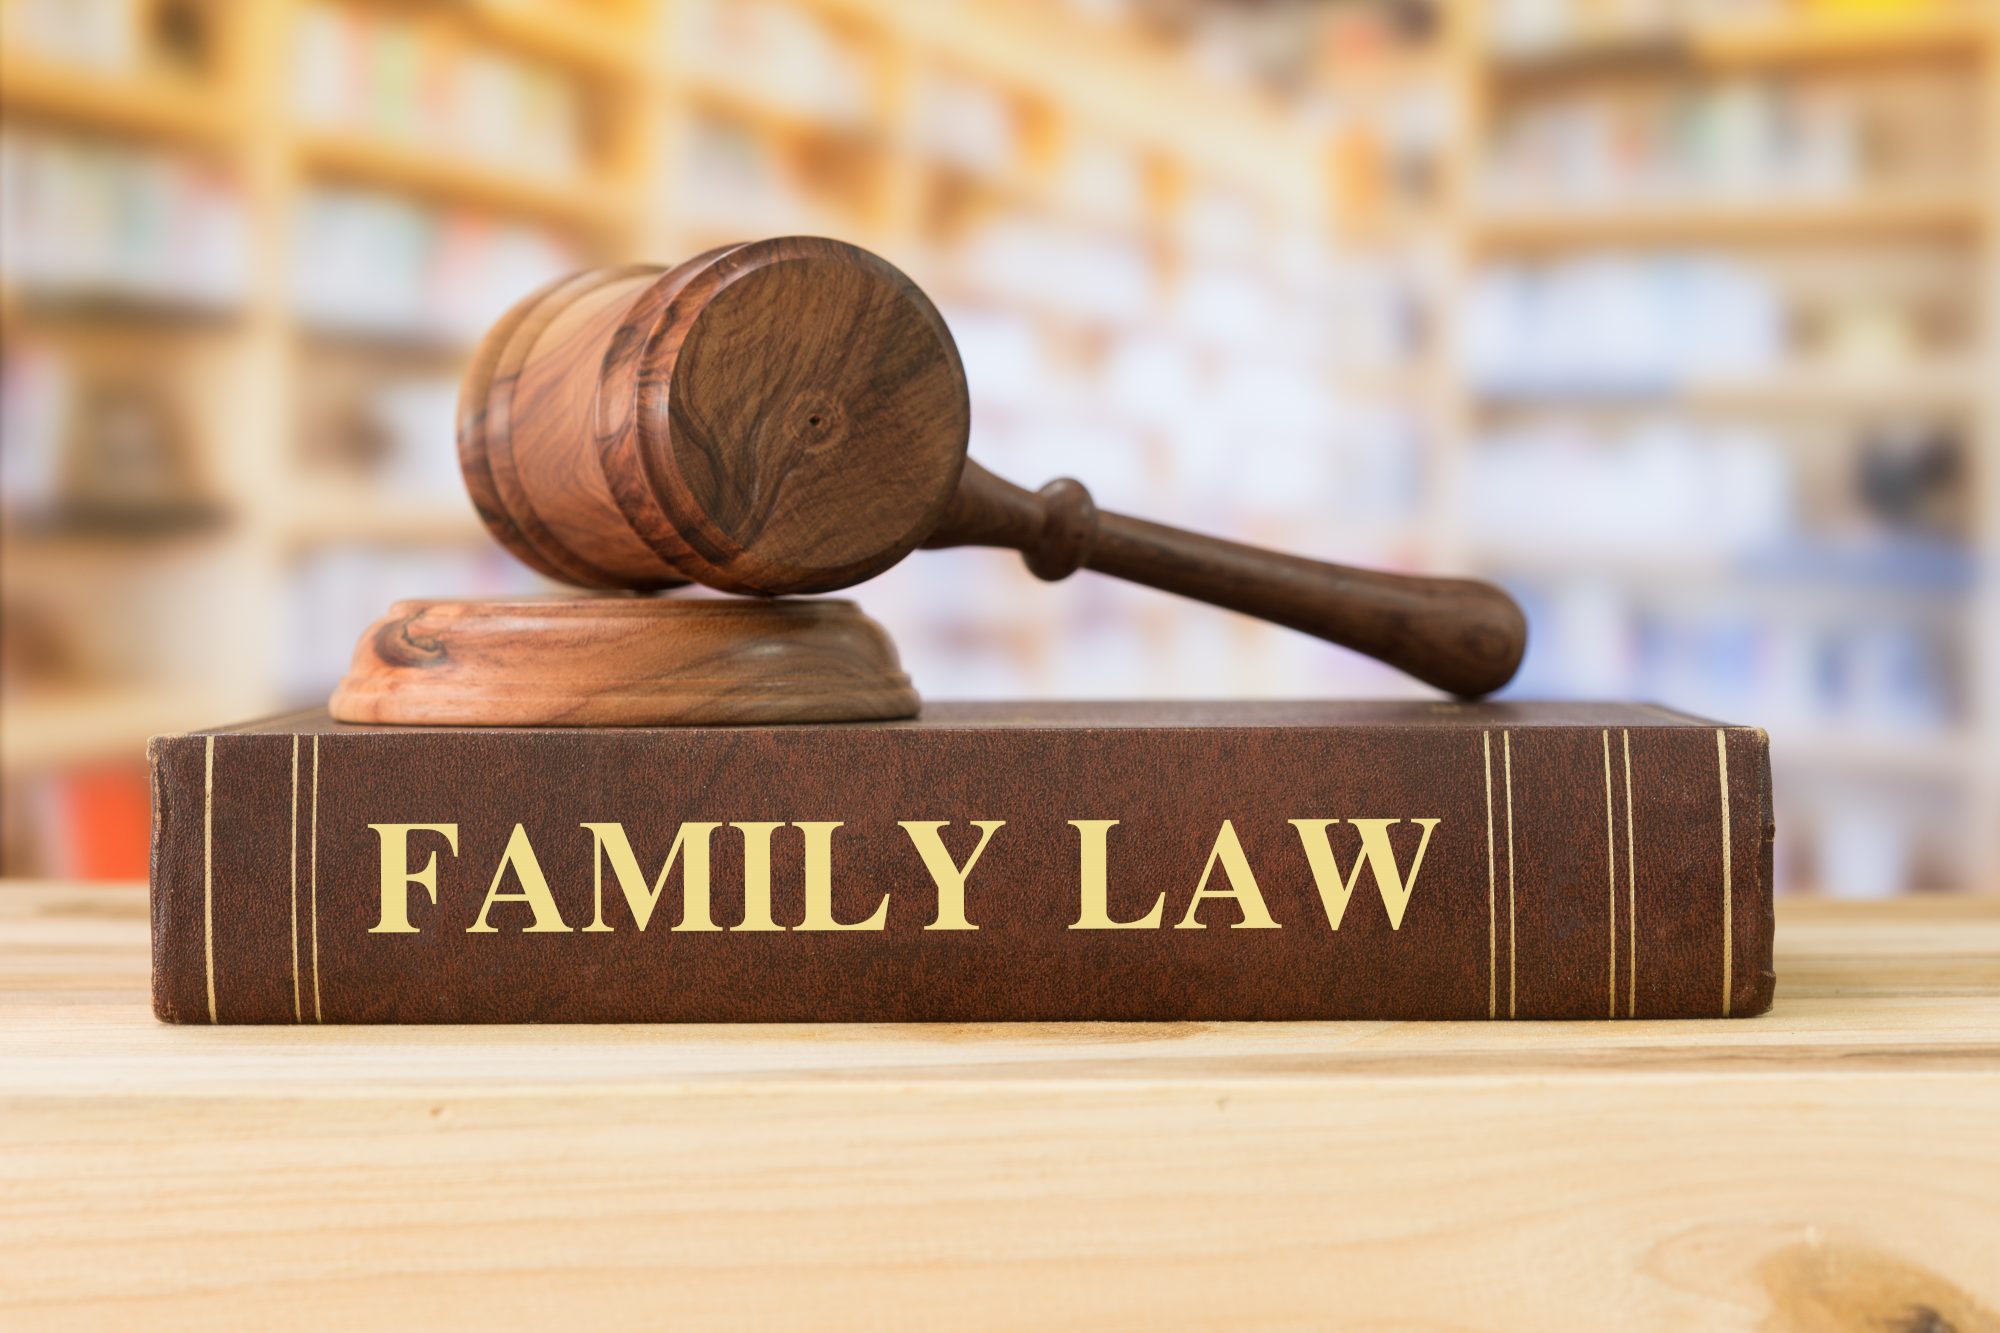 Choose a family law firm that aligns with your preferred method and is flexible enough to adapt its strategy as the situation requires.